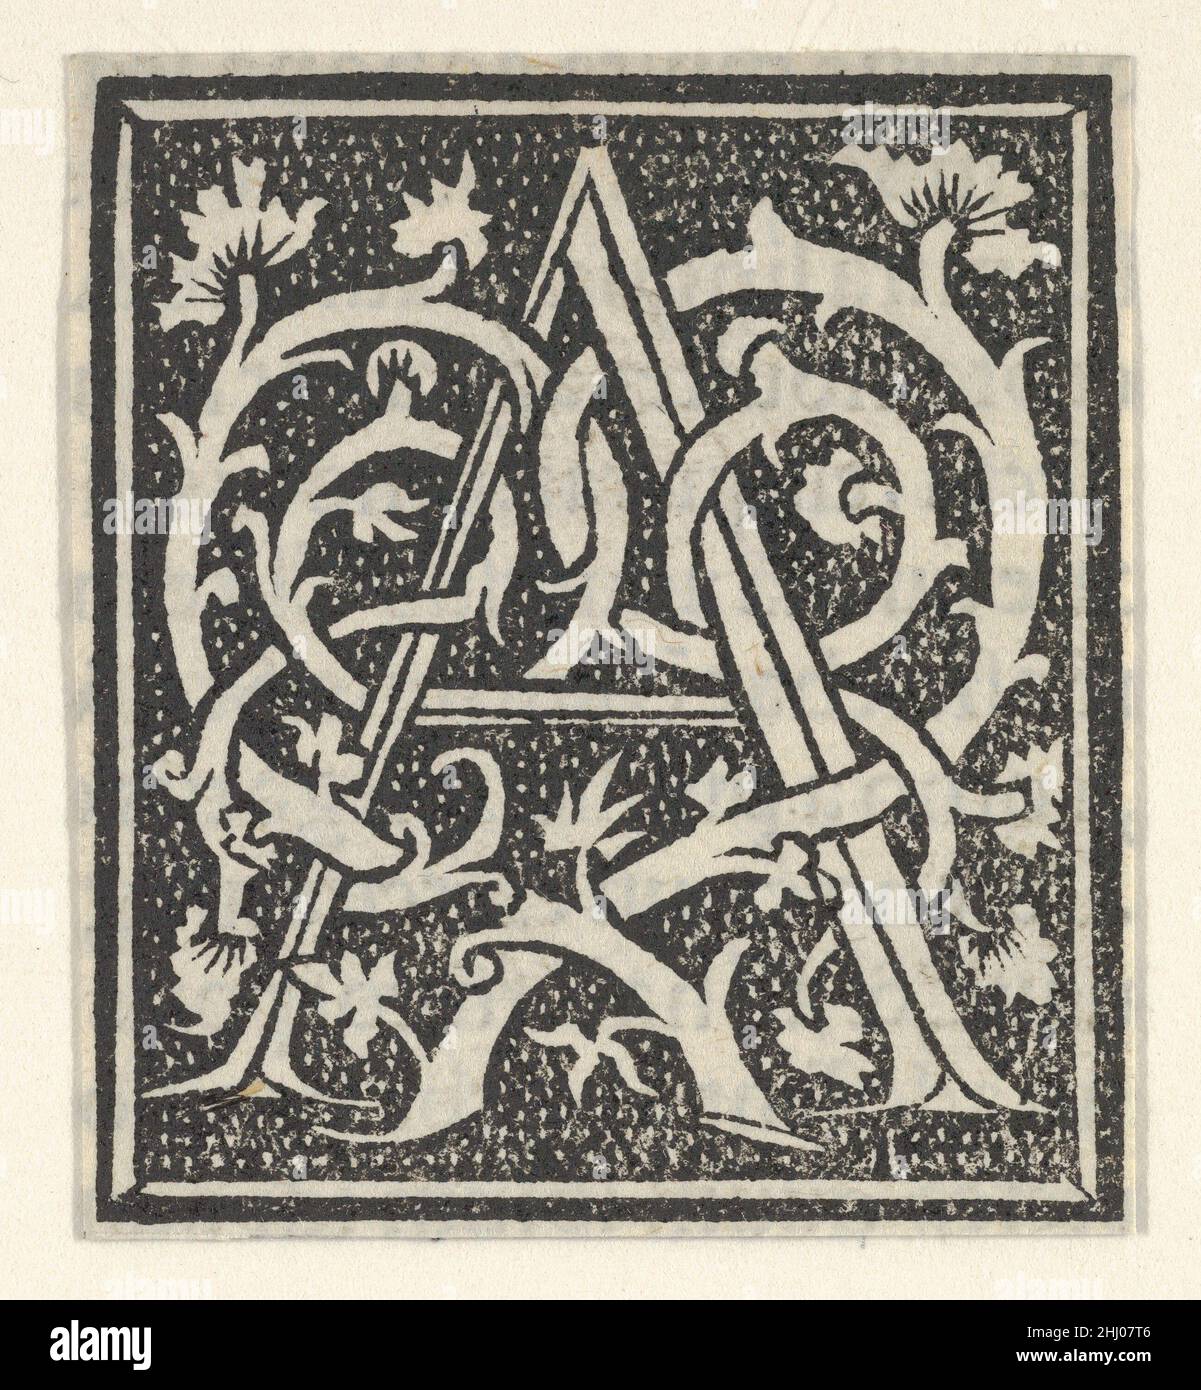 Initial letter A on patterned background 1520 Anonymous, Italian, 16th century. Initial letter A on patterned background  700384 Stock Photo